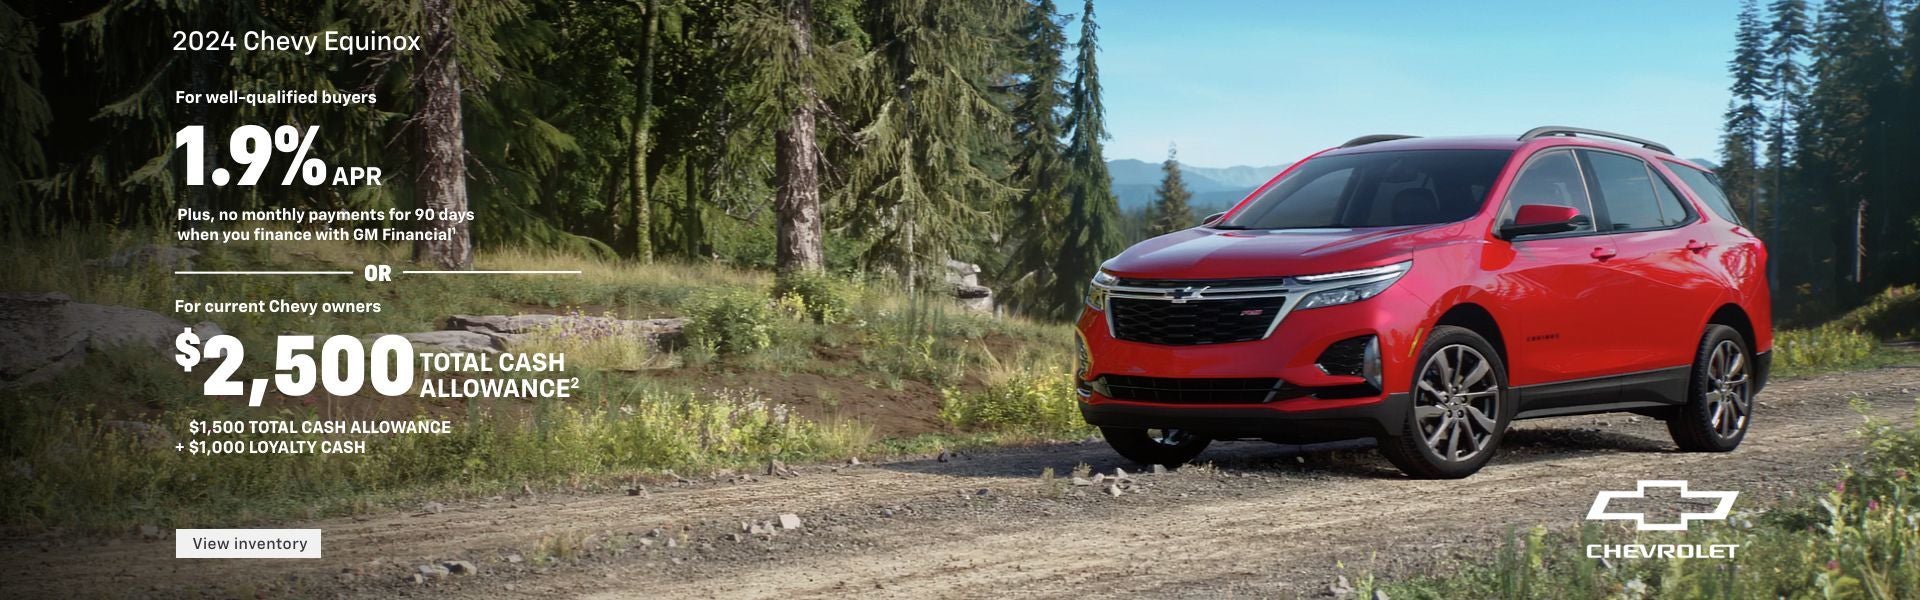 2024 Chevy Equinox. For well-qualified buyers 1.9% APR + no monthly payments for 90 days when you...